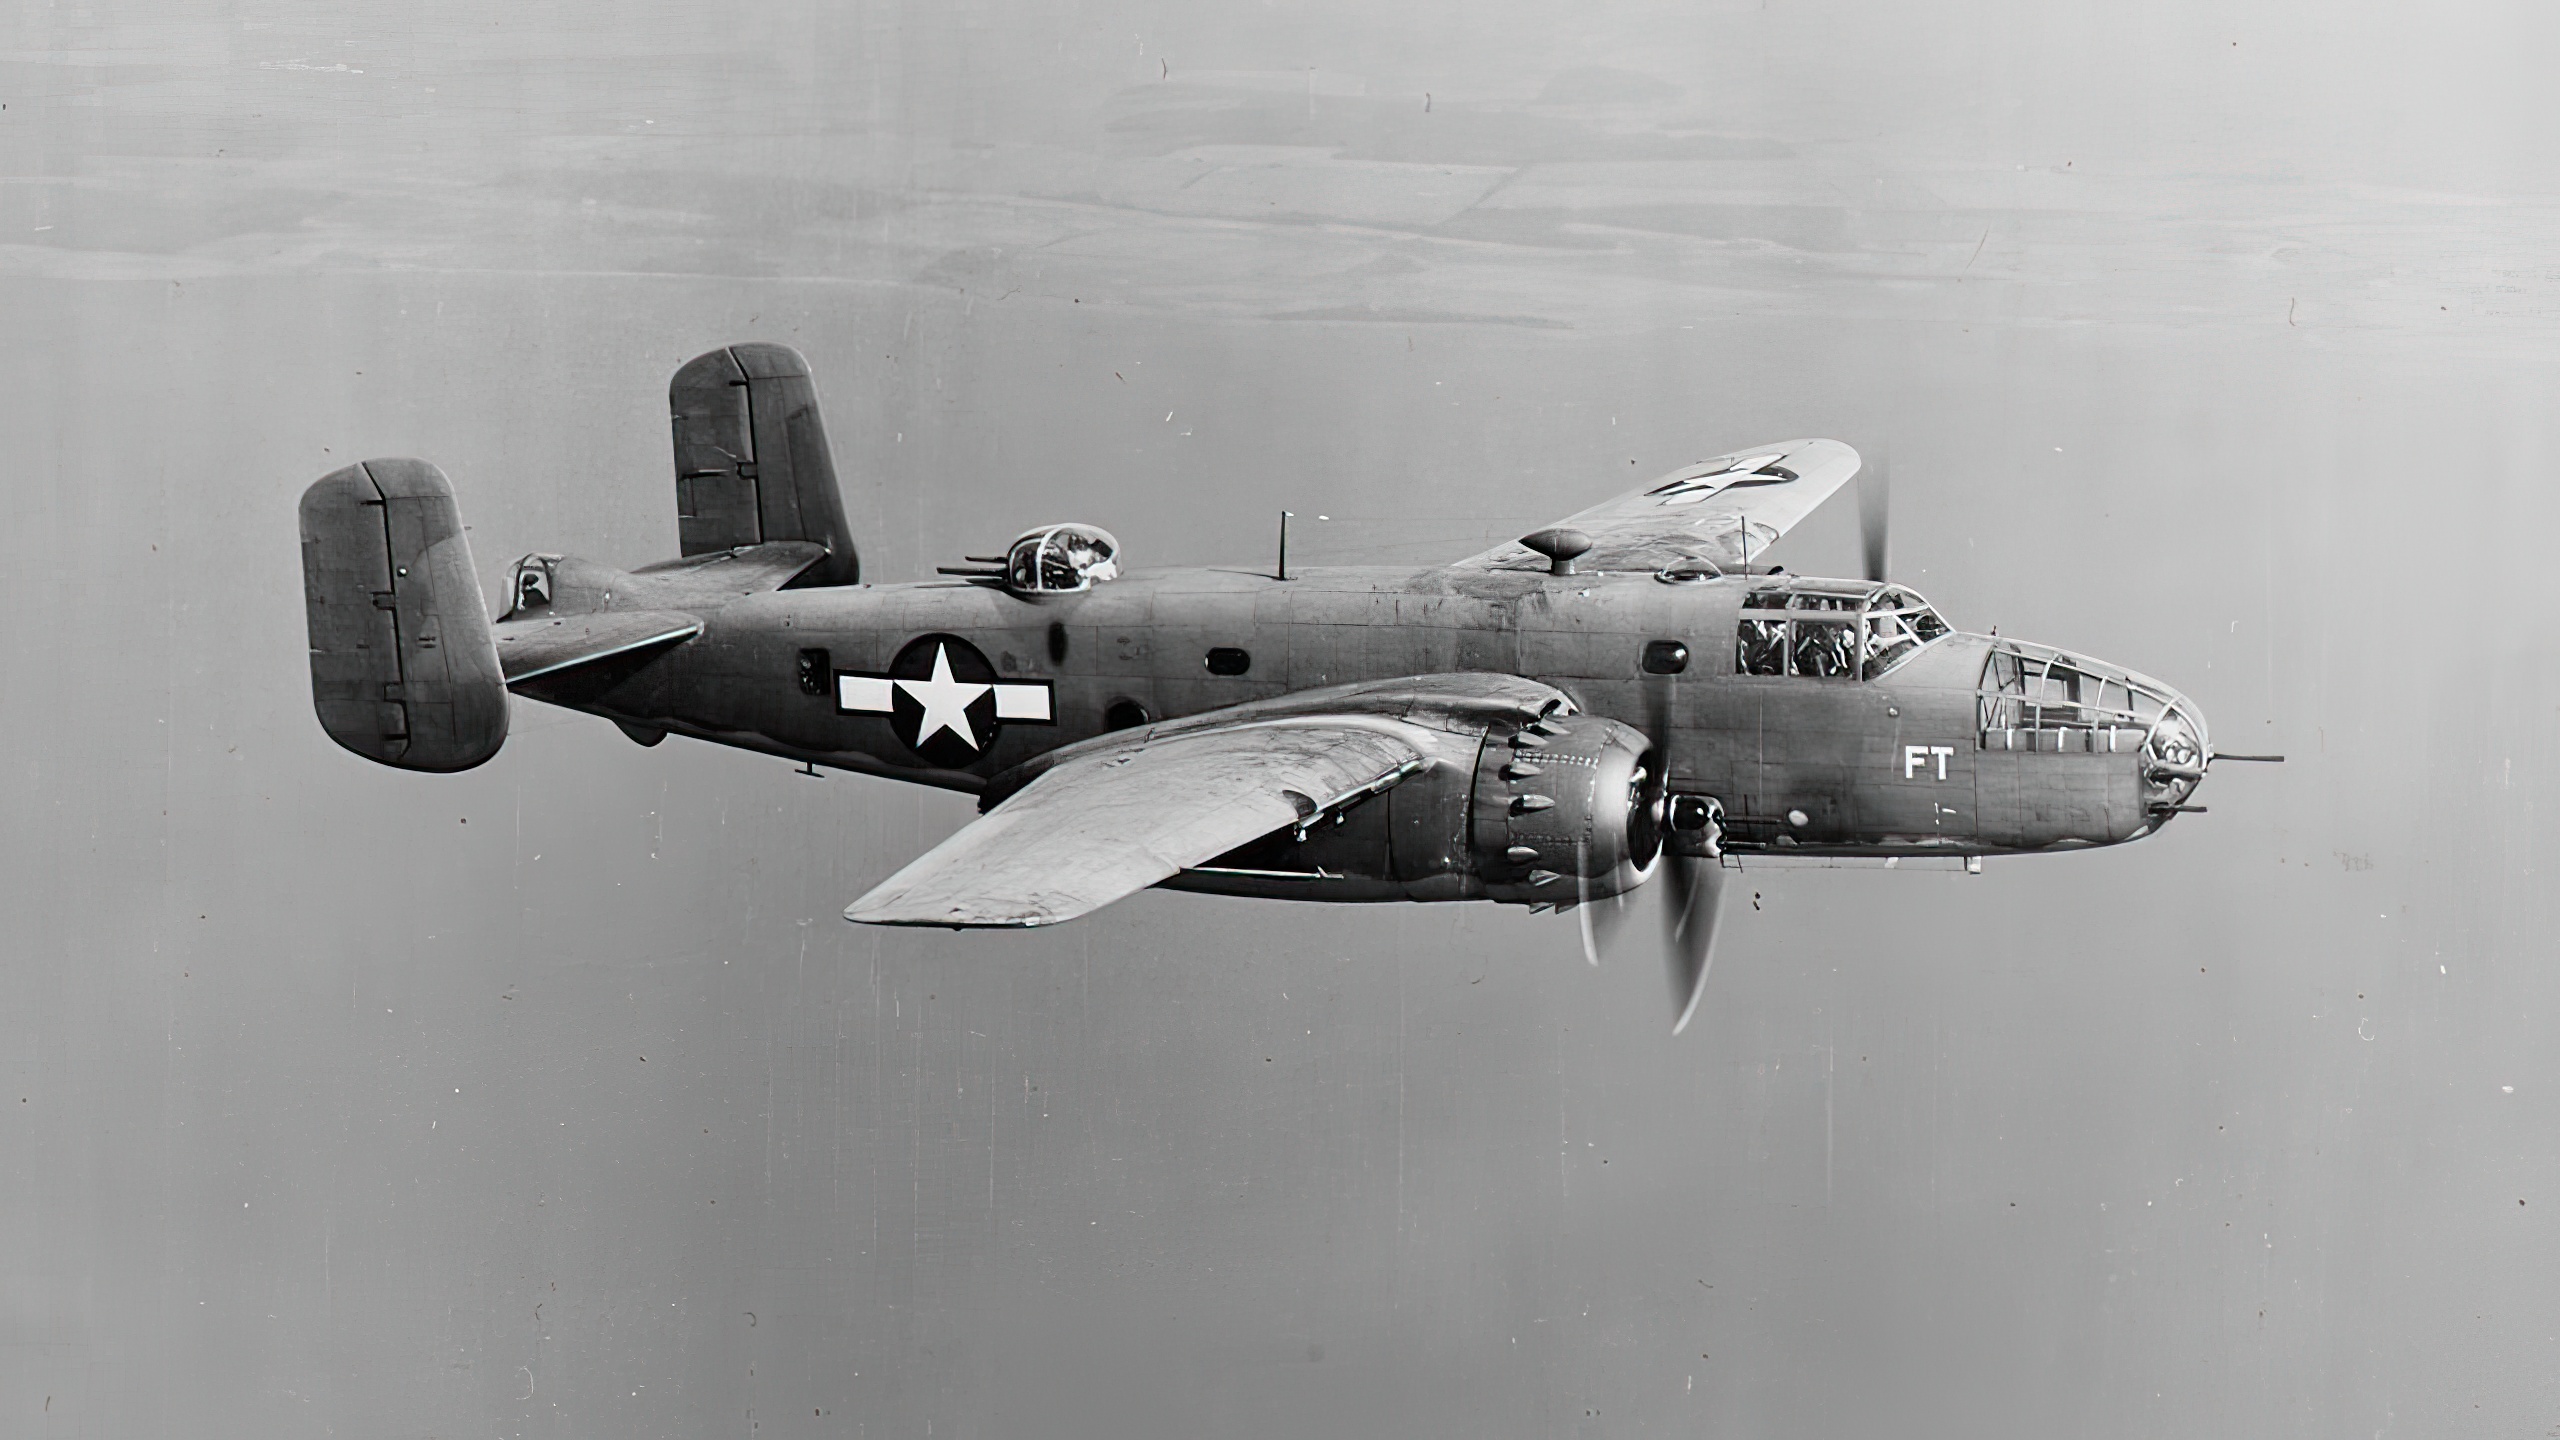 A U.S. Navy North American PBJ-1D Mitchell (BuNo 35094) in flight near the Naval Air Test Center Patuxent River, Maryland (USA), on February 28 1944